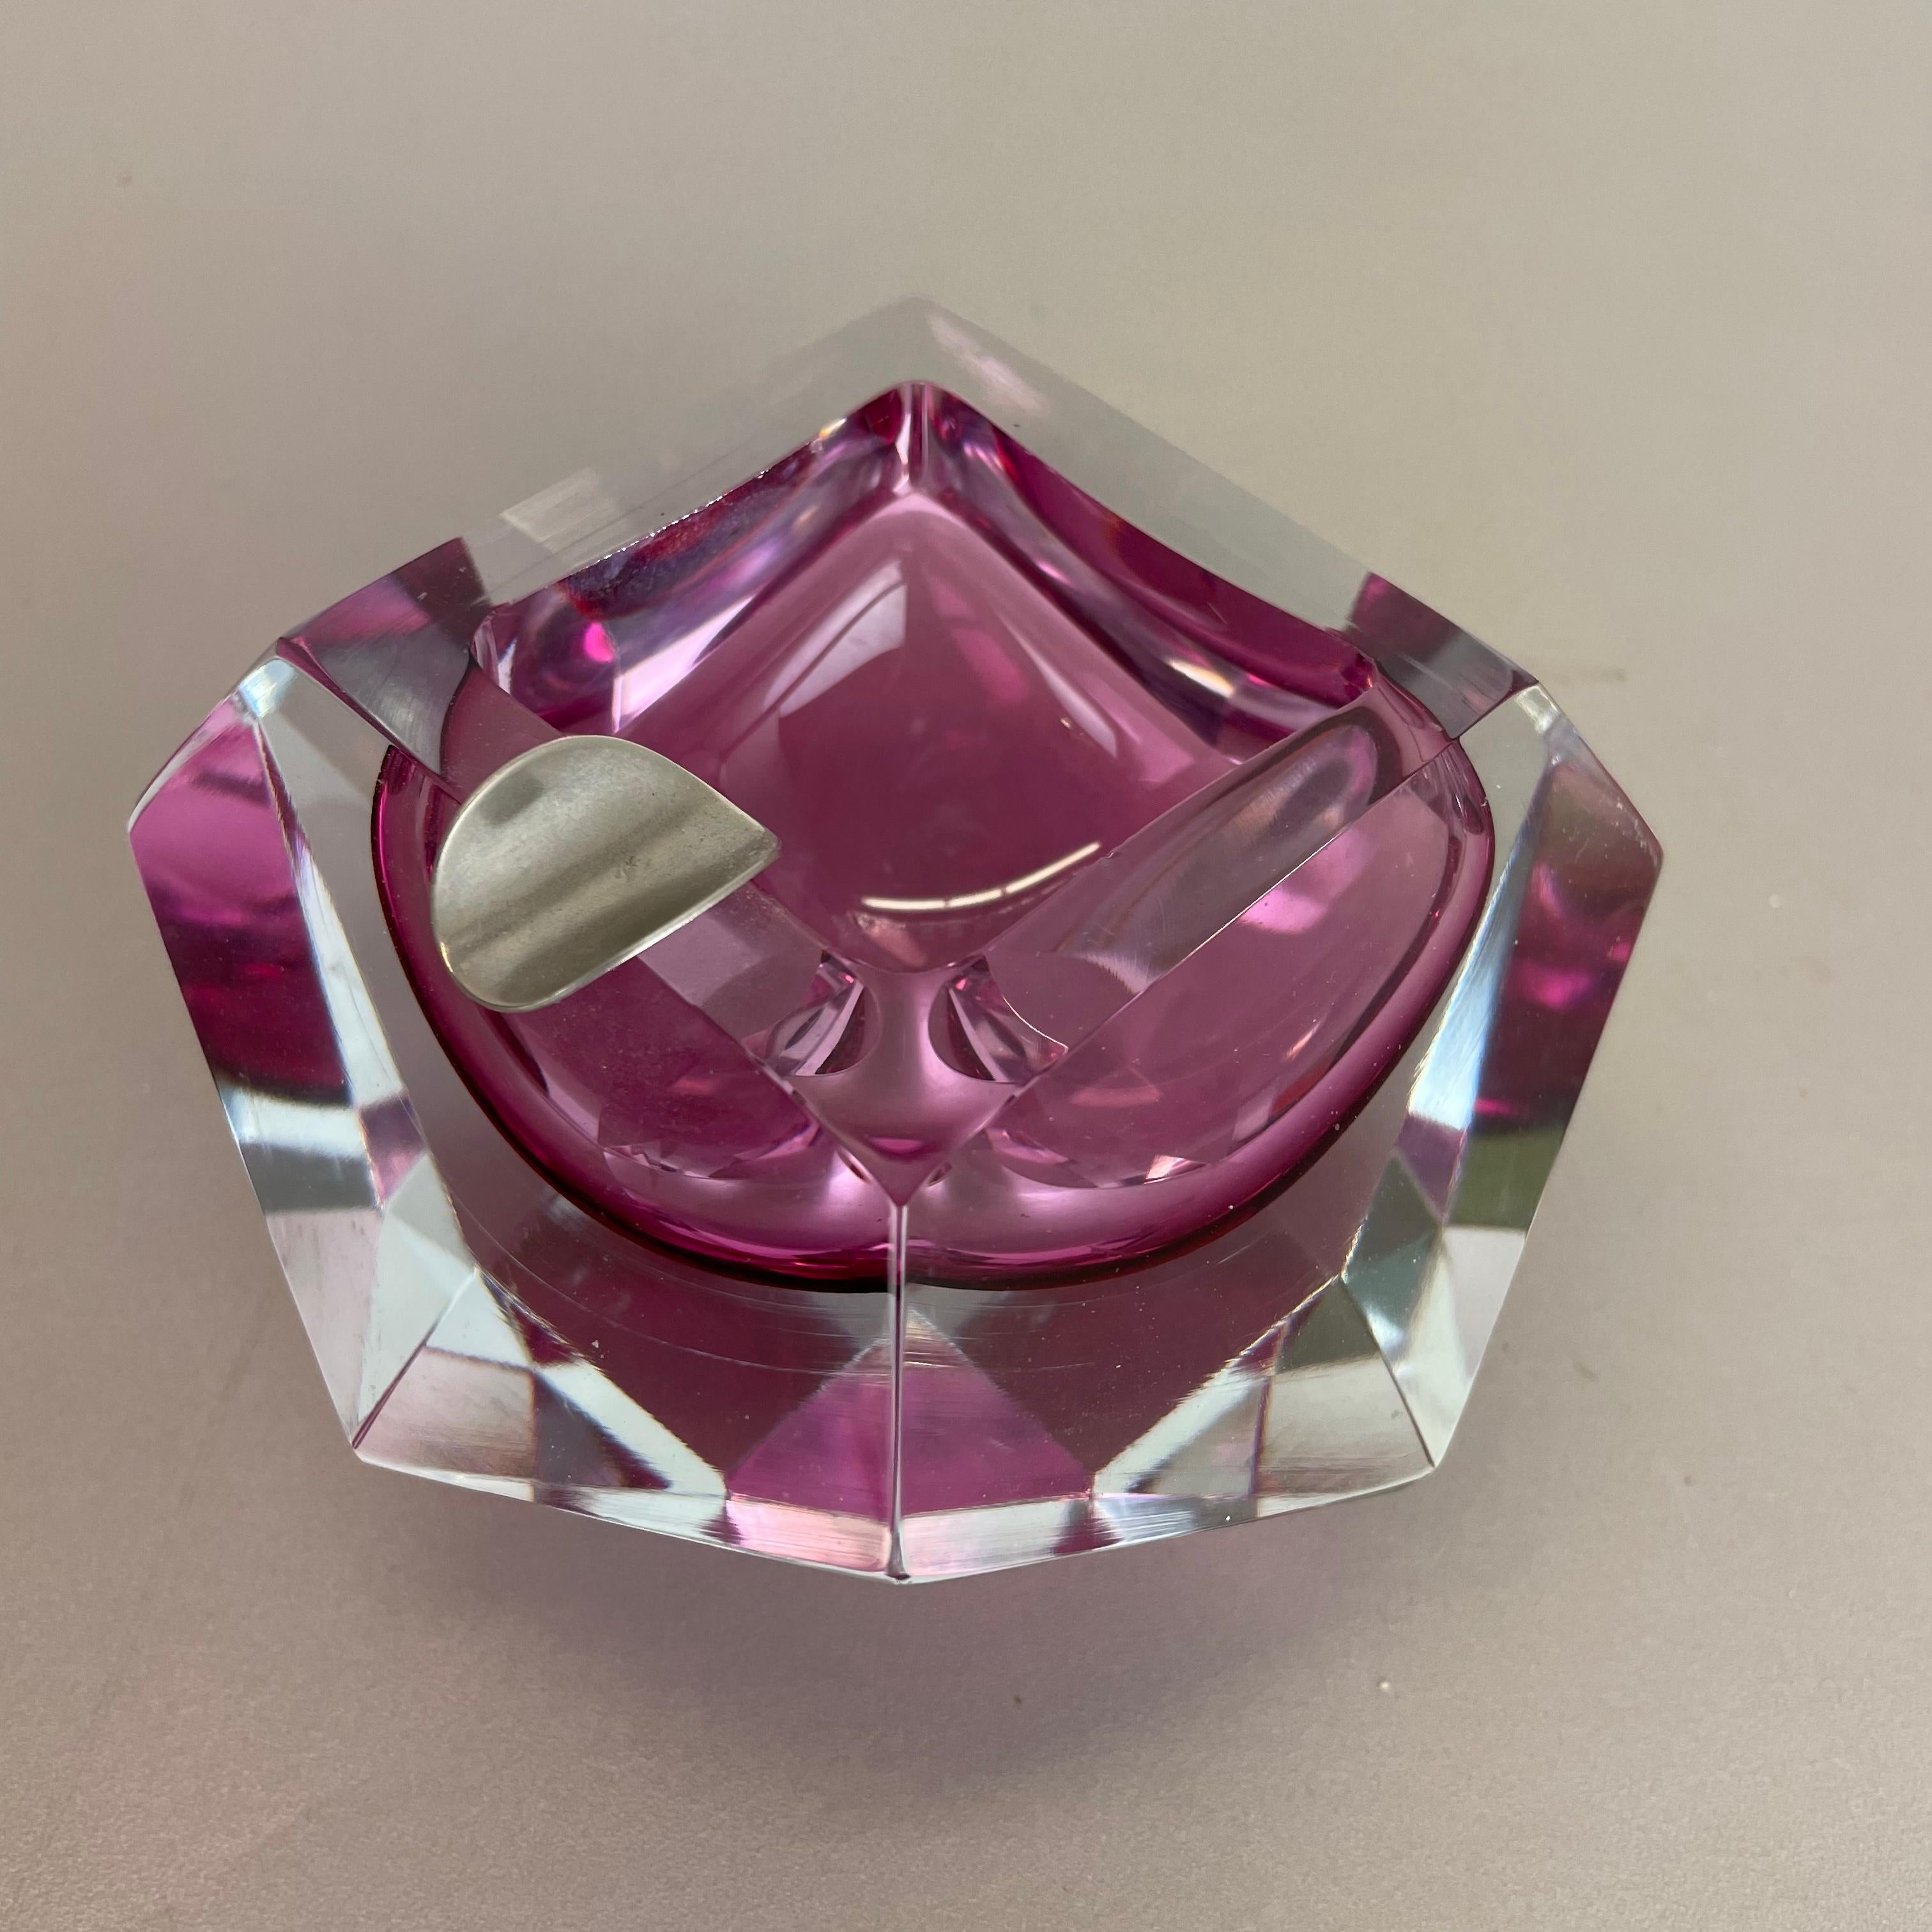 20th Century Murano Glass Sommerso pink DIAMOND Bowl Ashtray by Flavio Poli, Italy, 1970s For Sale